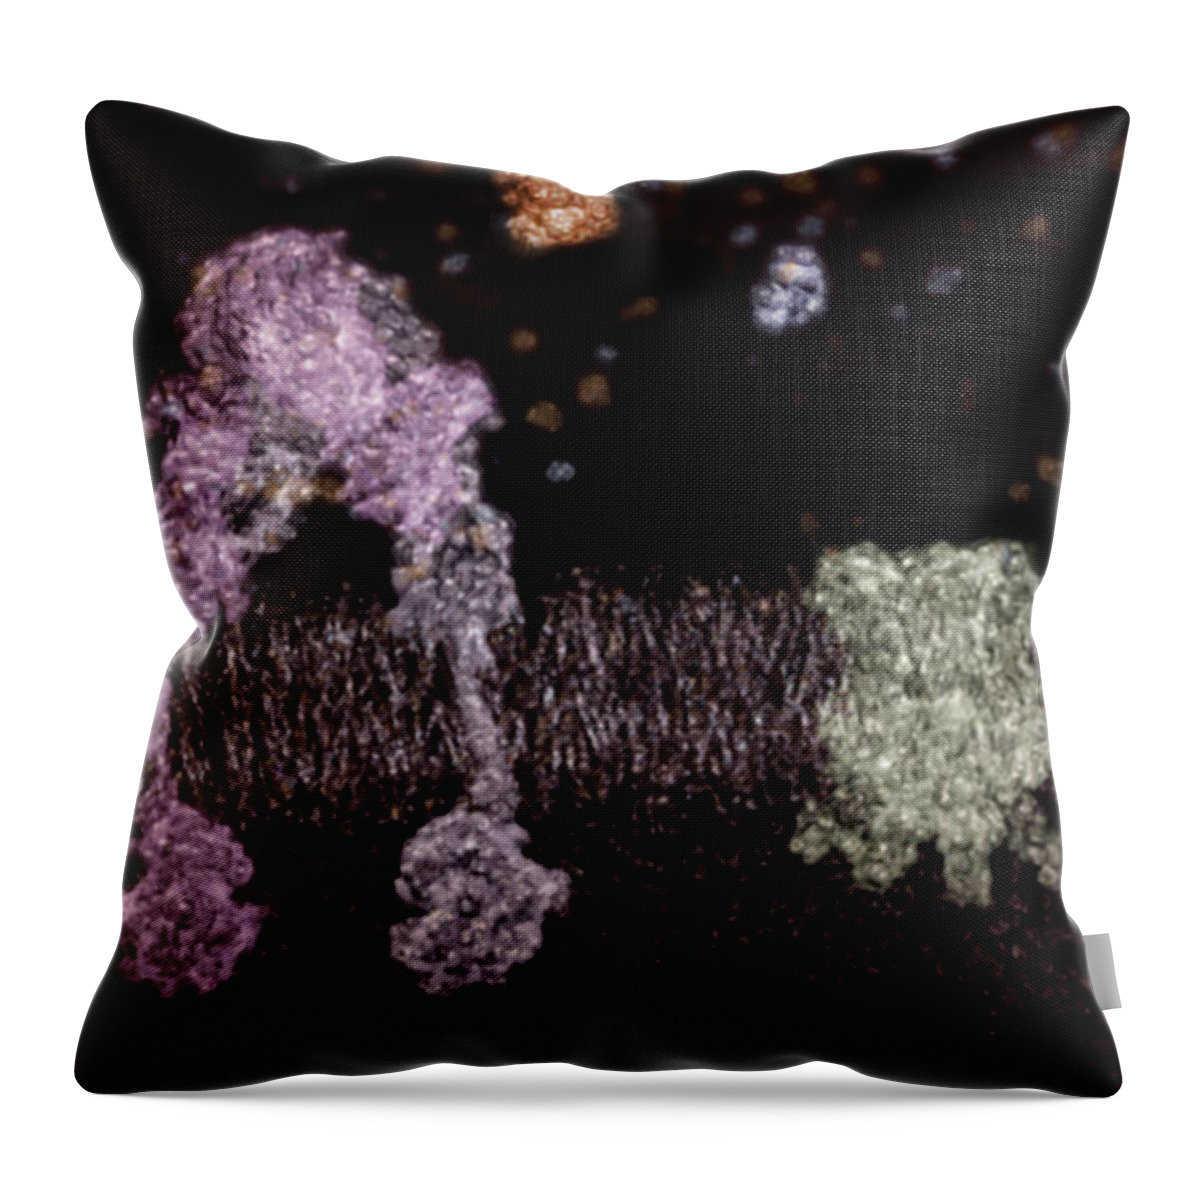 3d Model Throw Pillow featuring the photograph Glucose Transportation Into Cell, 1 Of 3 #1 by Anatomical Travelogue